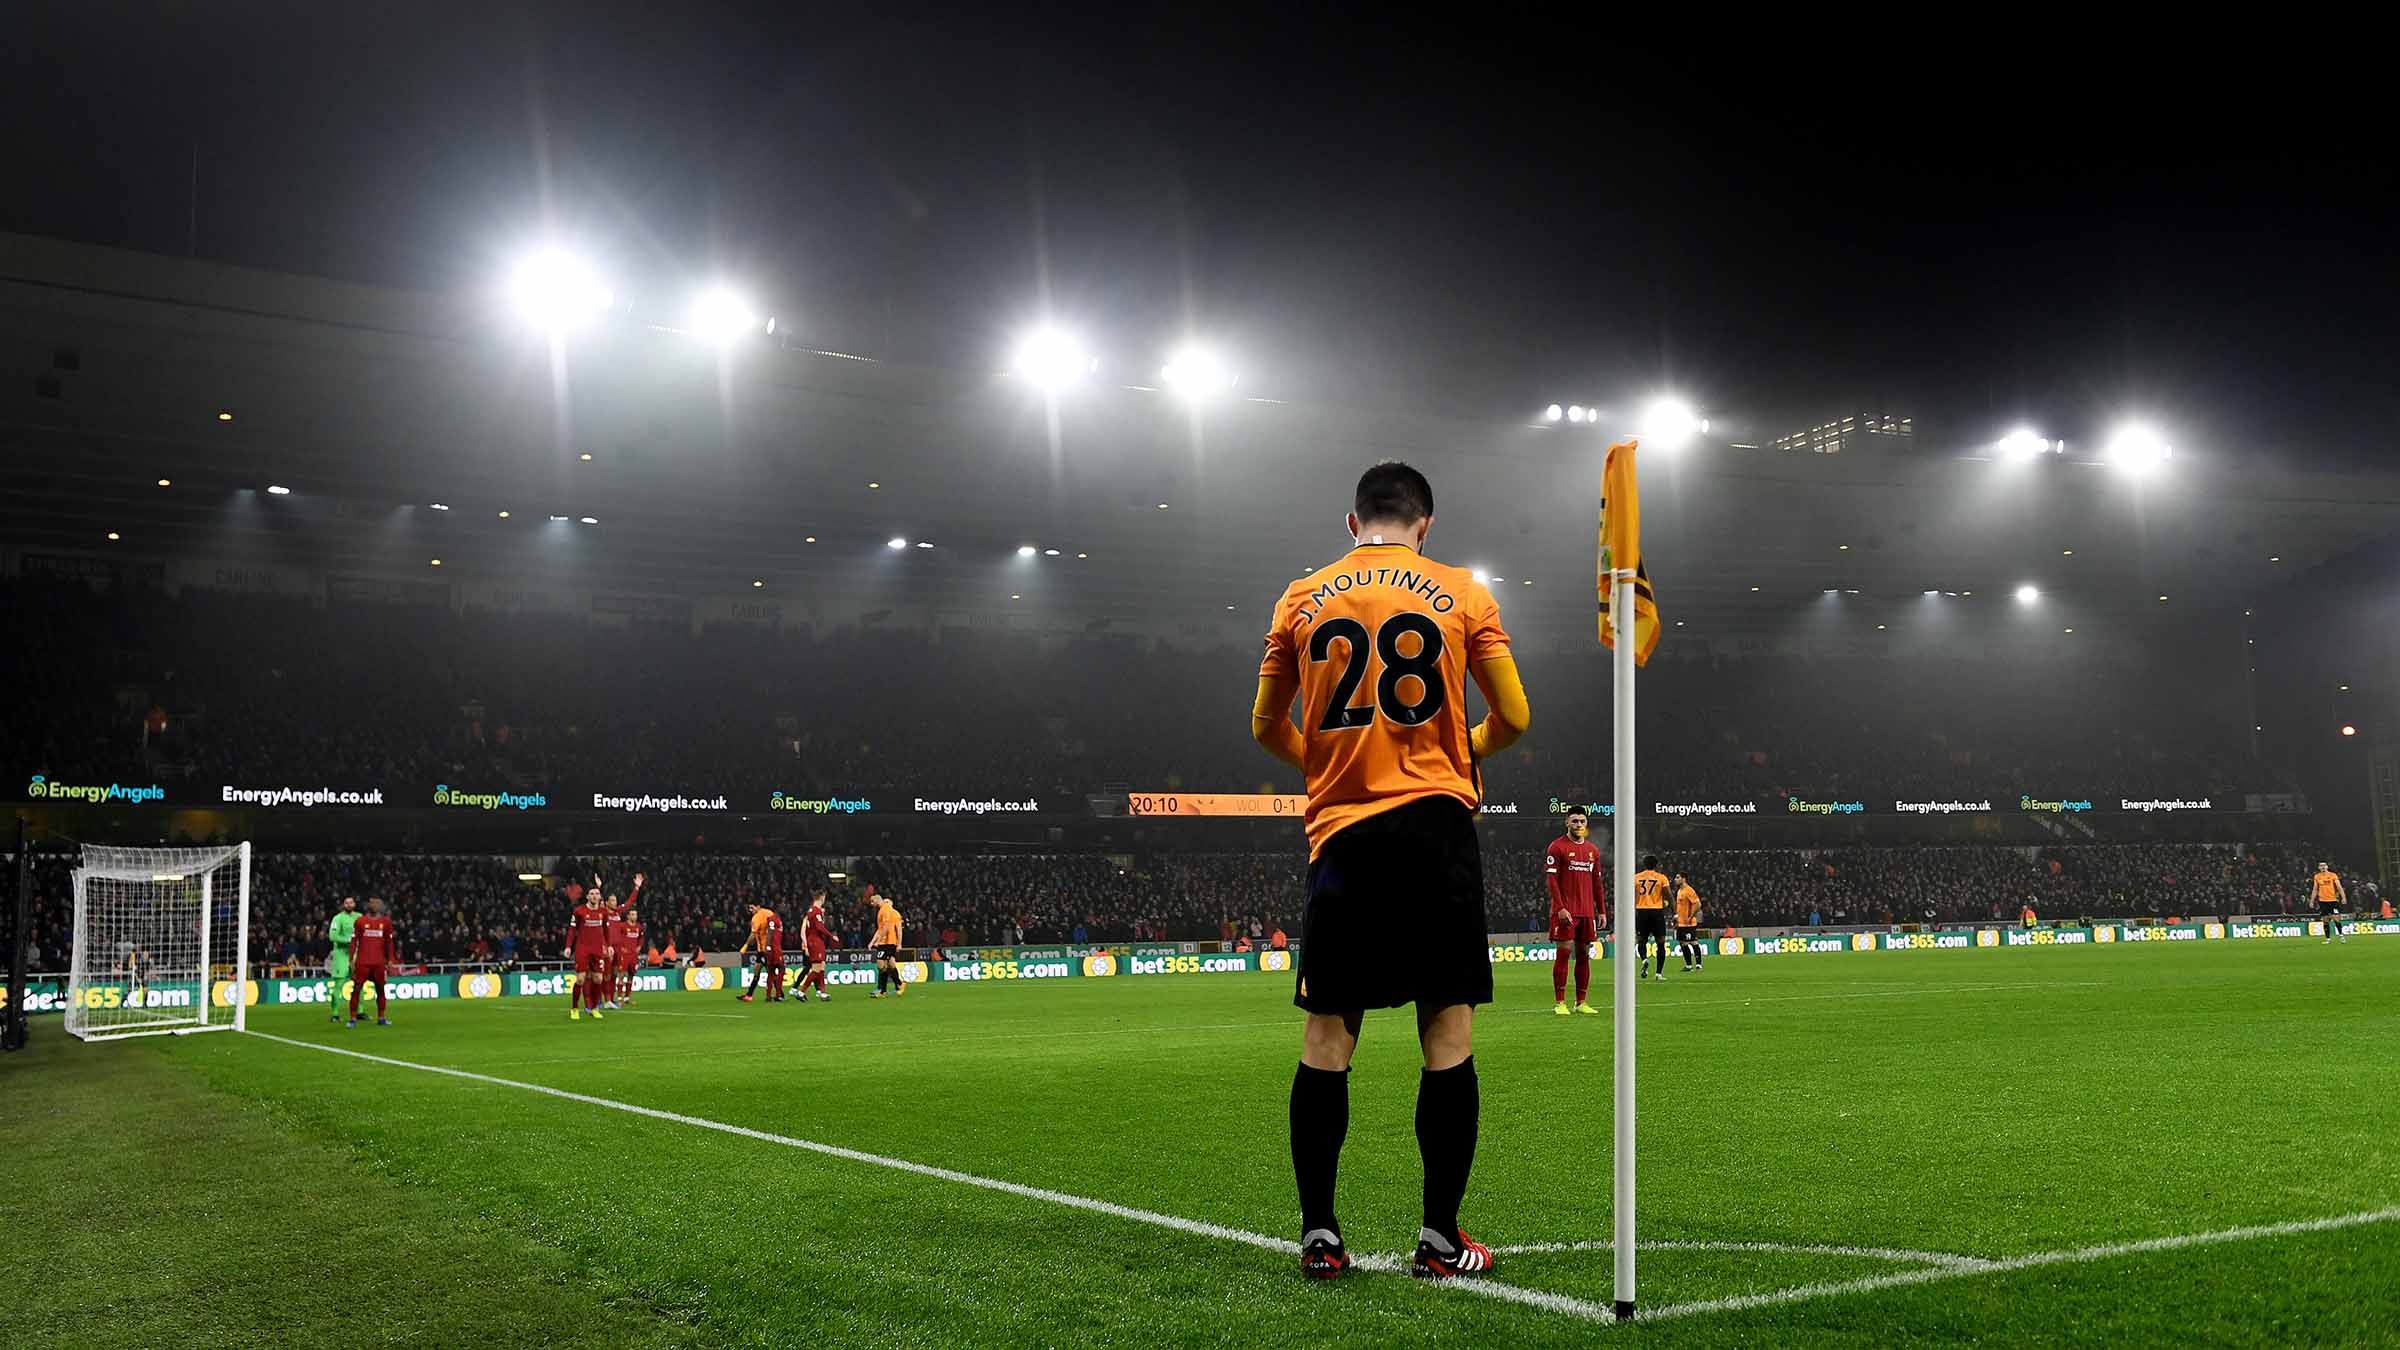 Wolves criticize UEFA for not postponing Europa League clash against Olympiacos